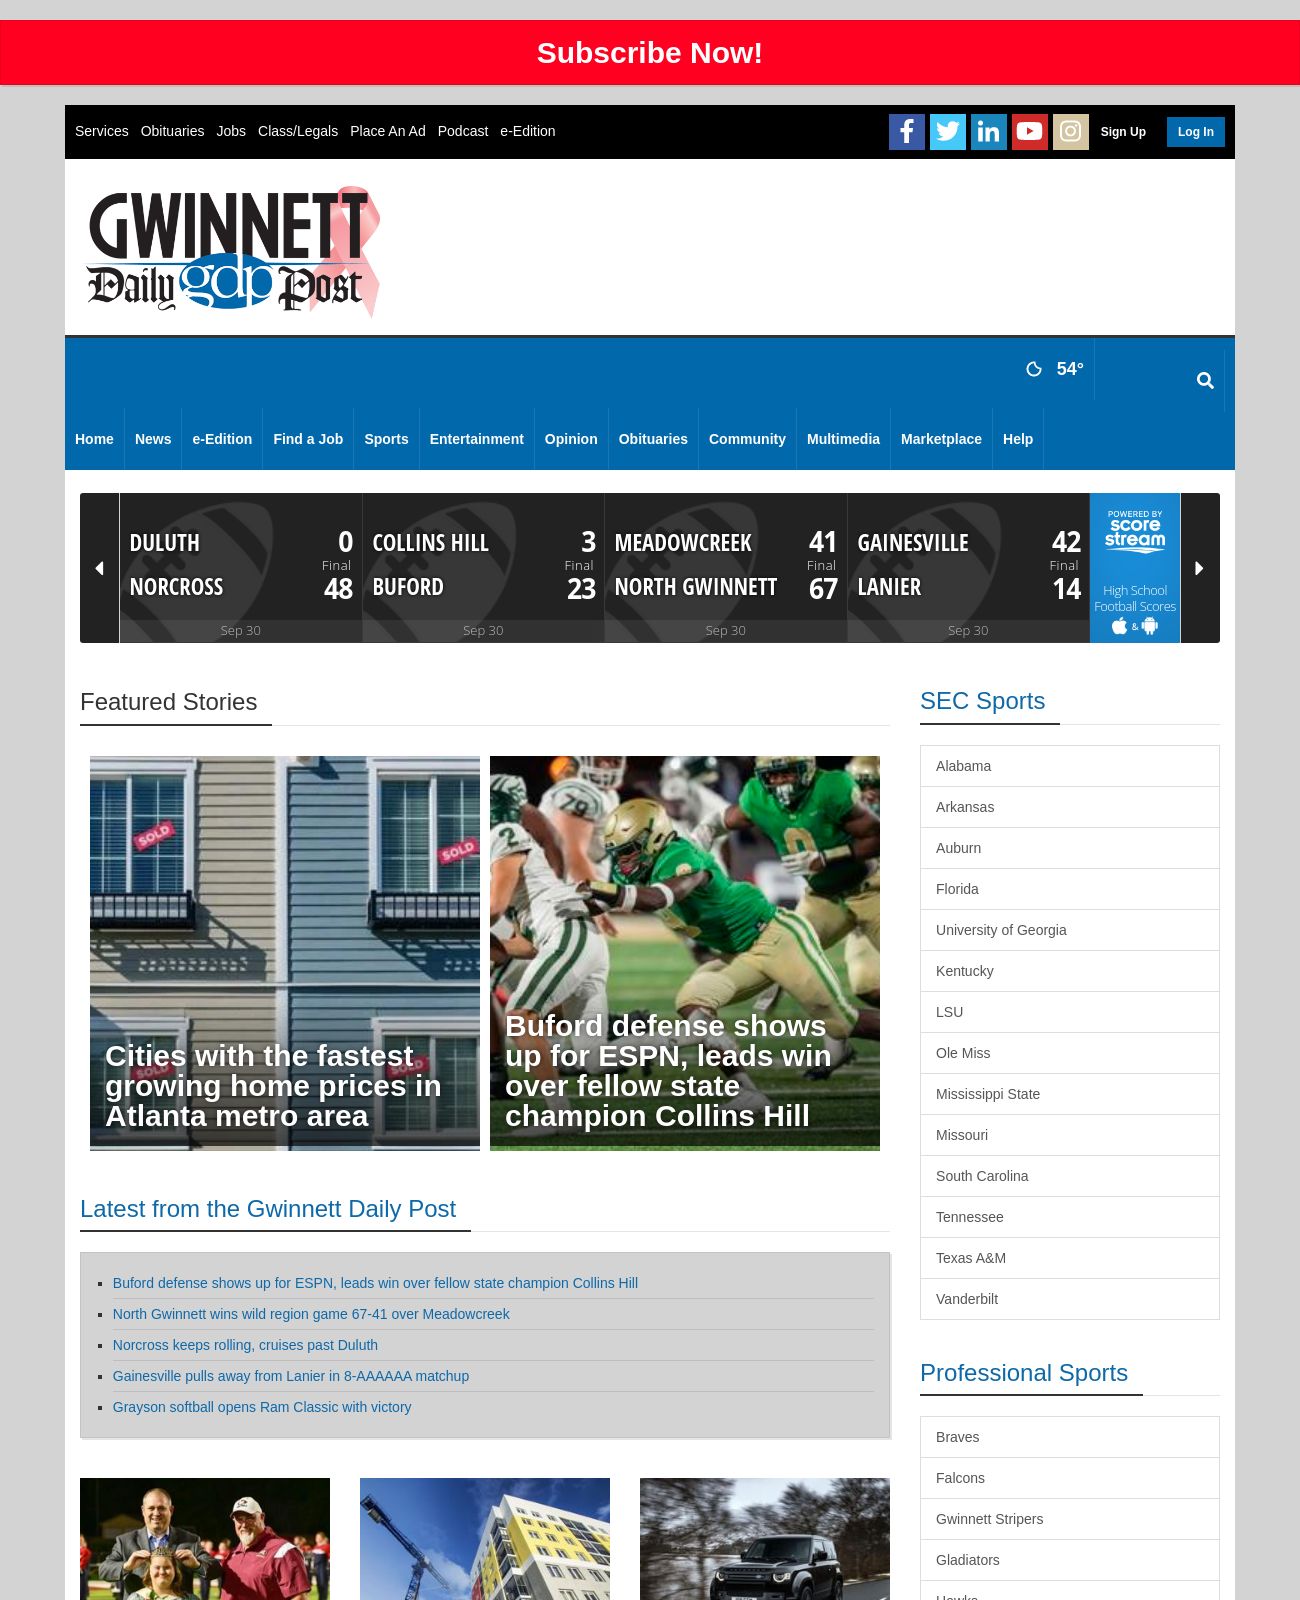 Gwinnett Daily Post at 2022-10-01 07:59:32-04:00 local time